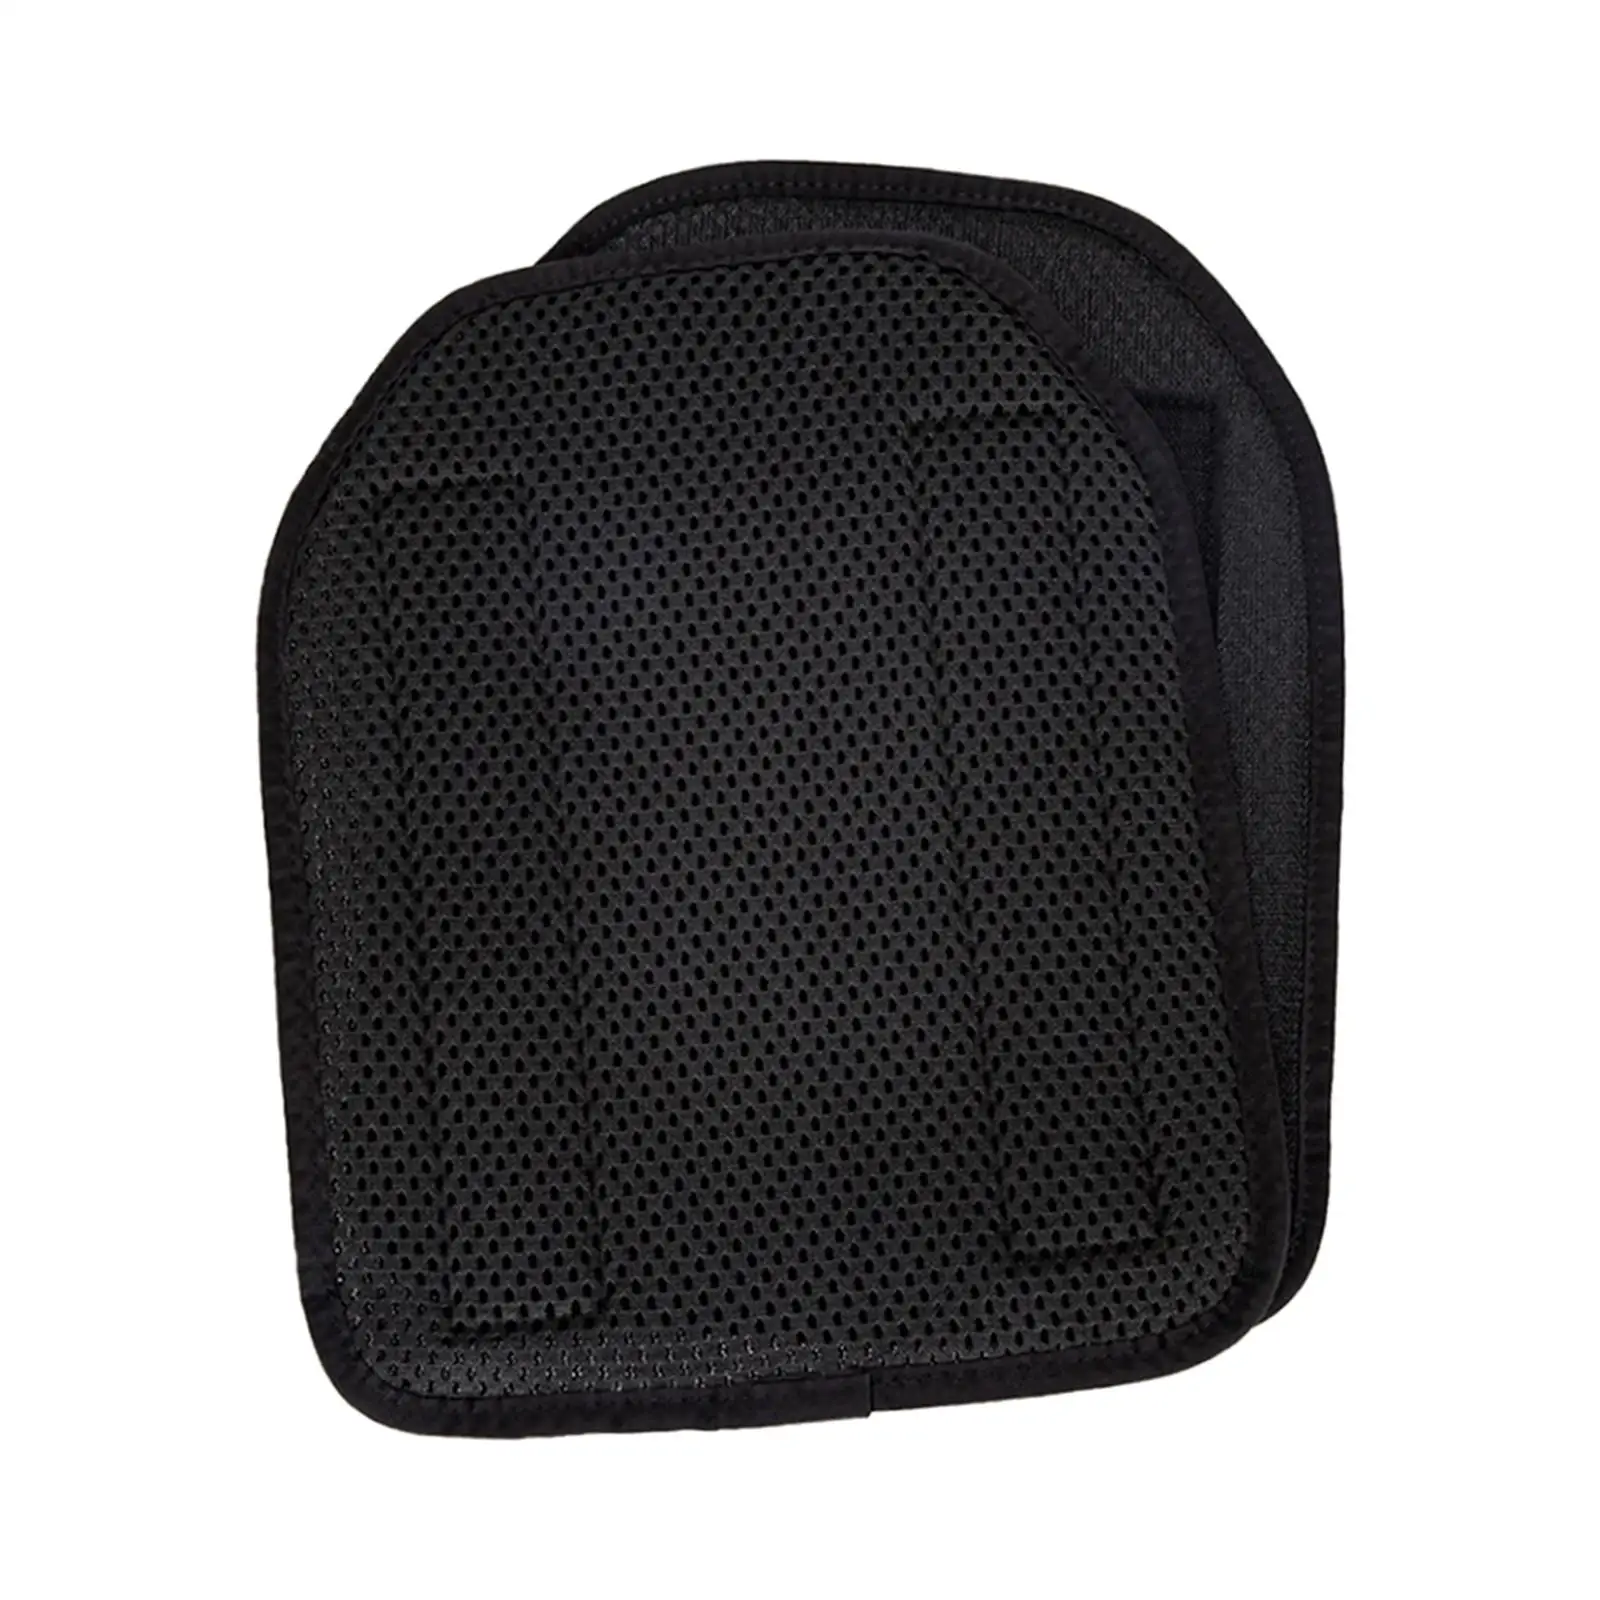 2Pcs Gear Vest Inner Liner Foam Shock Plate Plate Carrier Back Thoracic Protection Vest Pad Plates for Outdoor